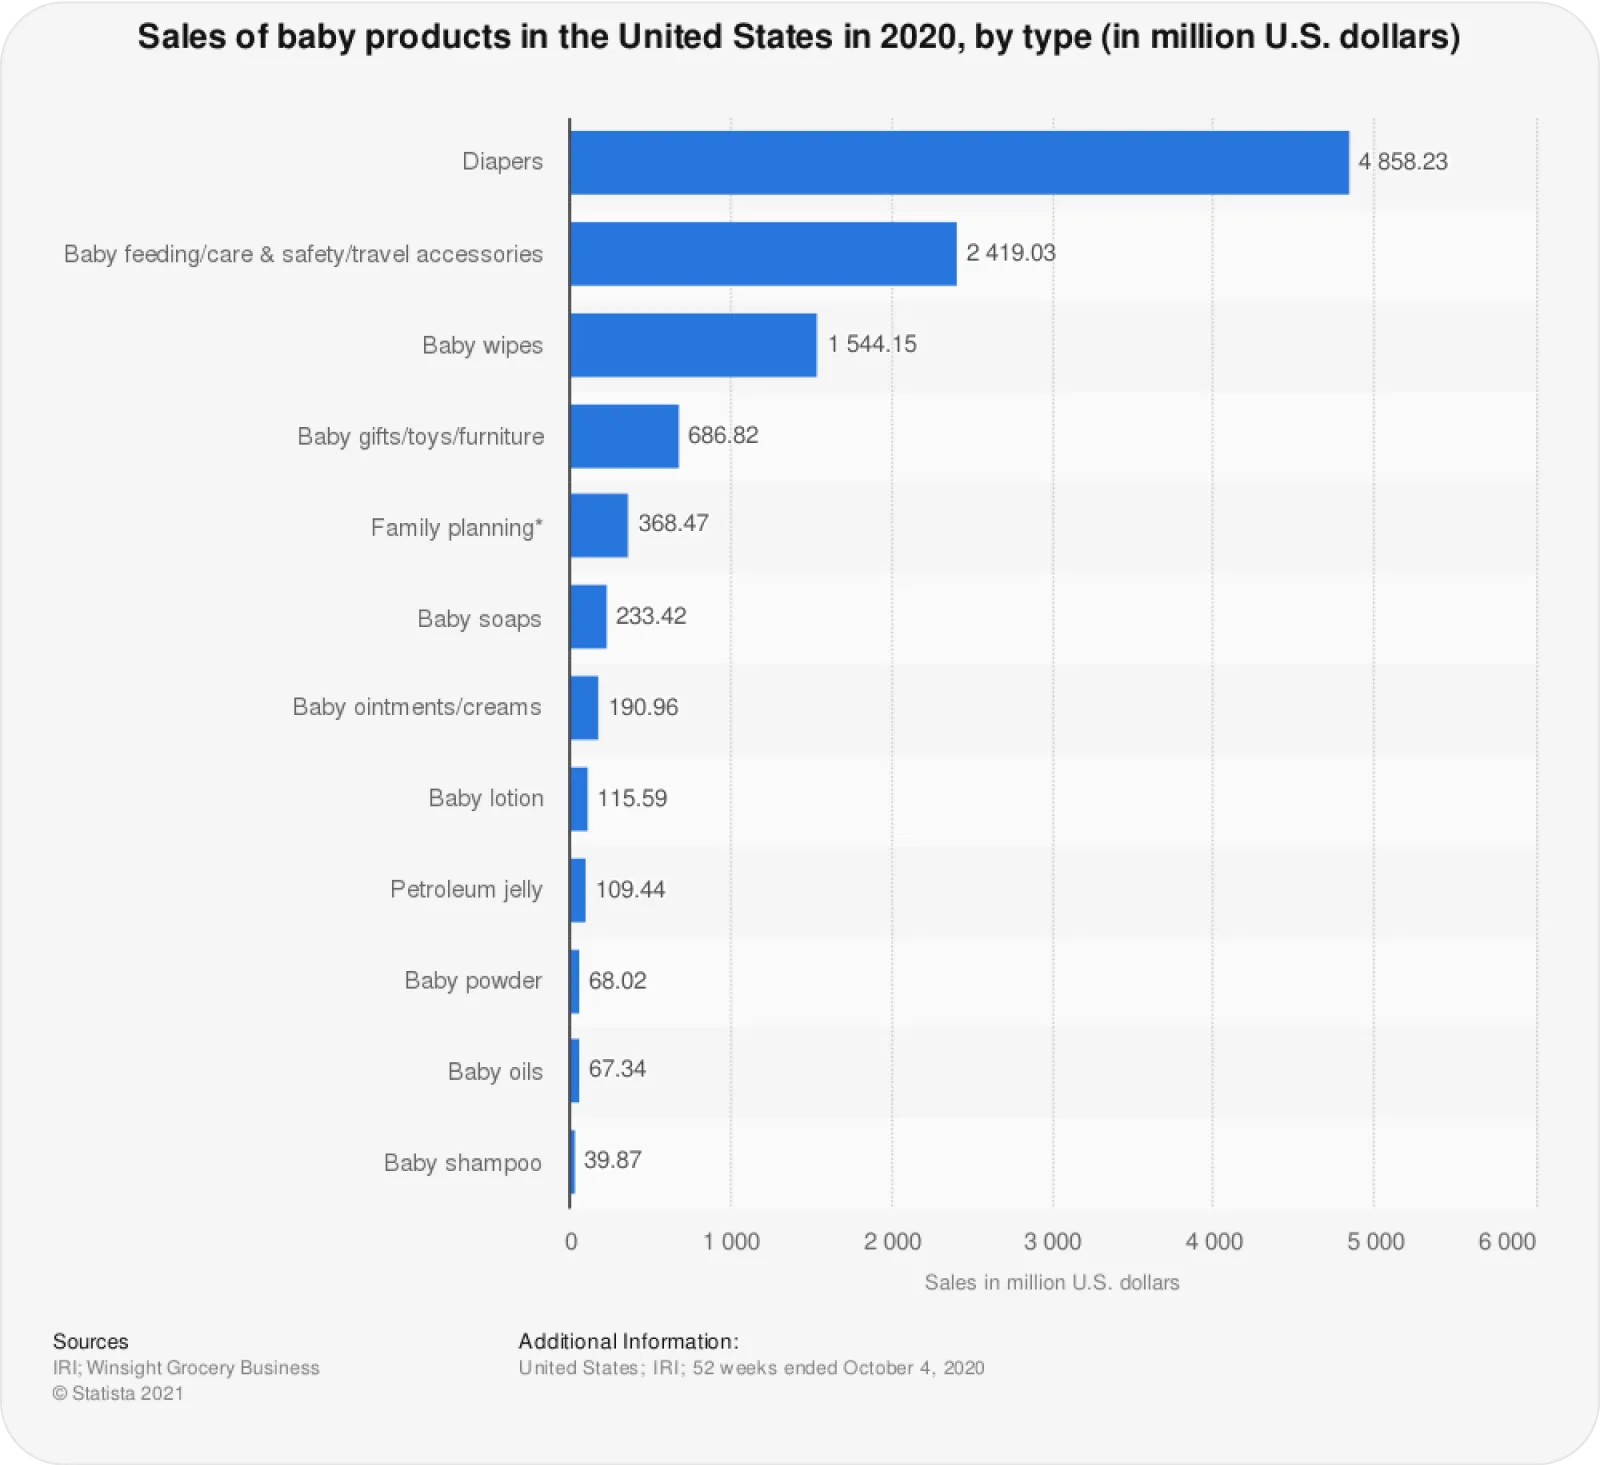 Sales of baby products in the US in 2020 table